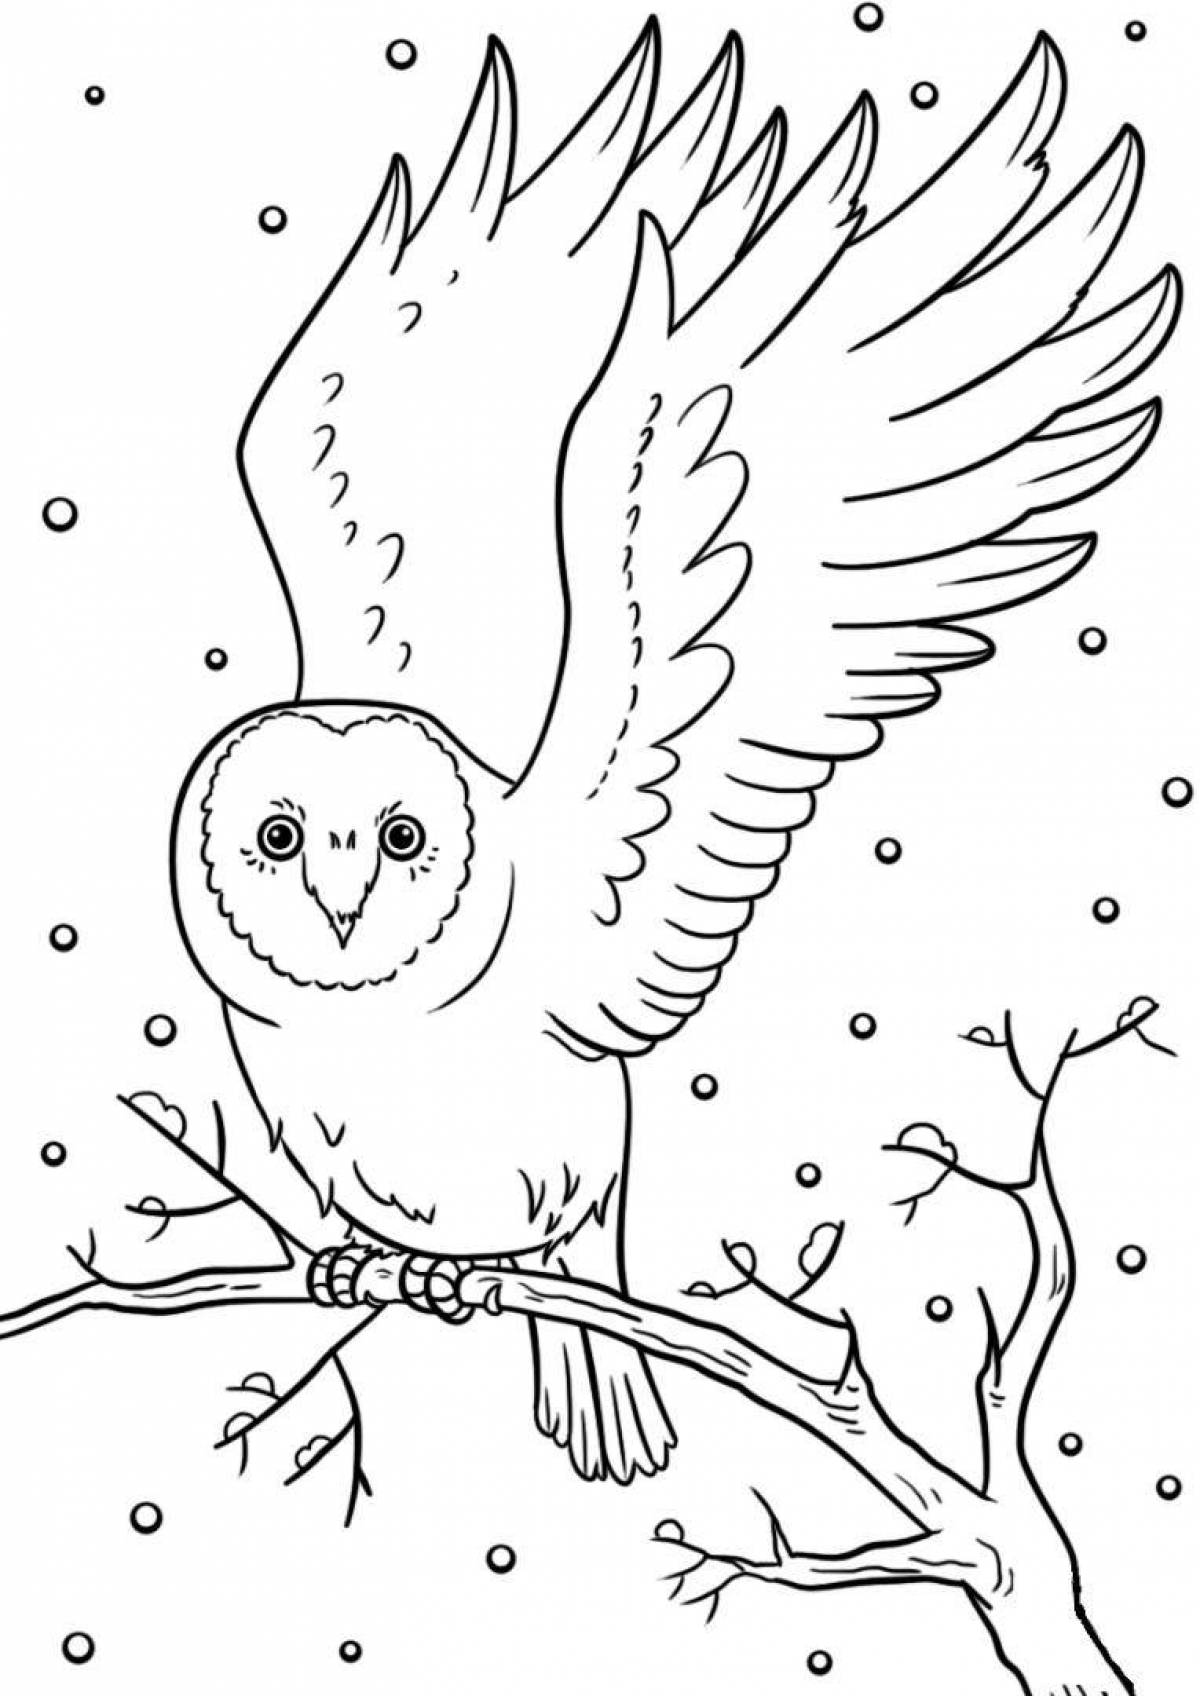 Wonderful animal coloring pages in winter